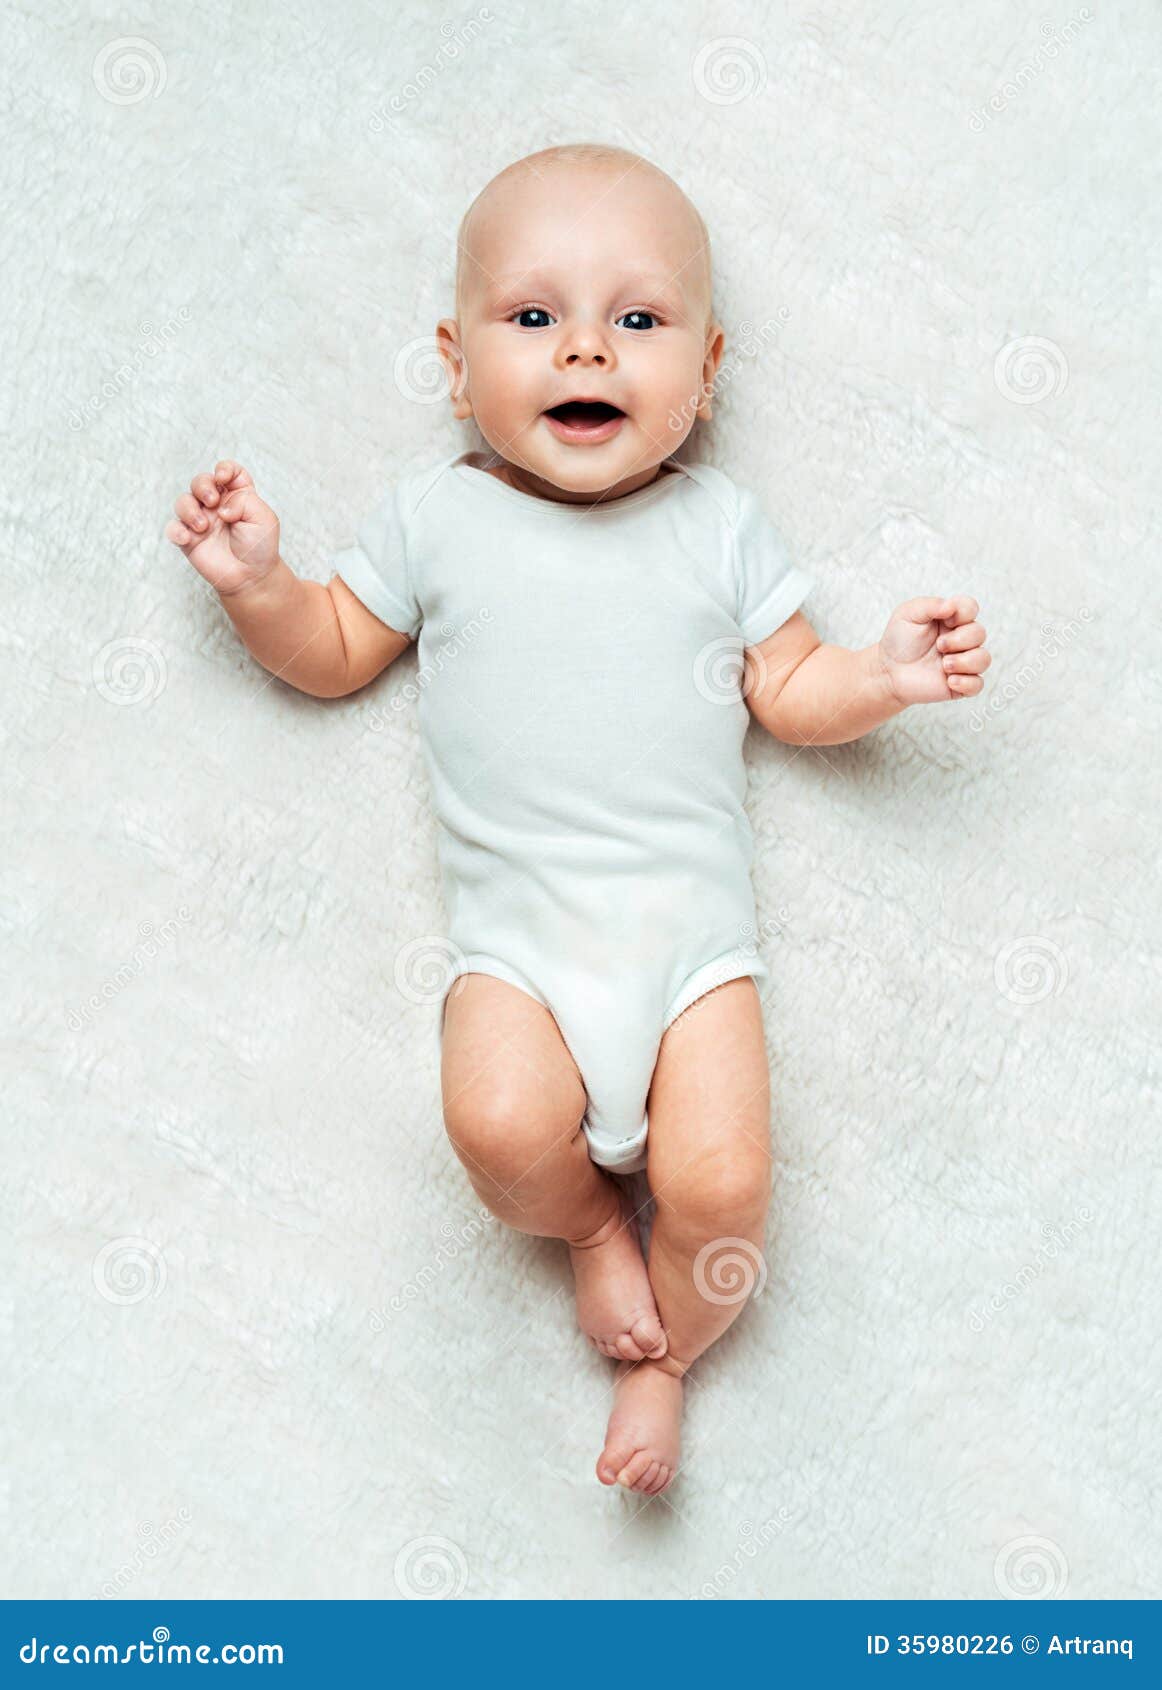 Pretty Baby is Lying on the Carpet Stock Photo - Image of care, bright ...